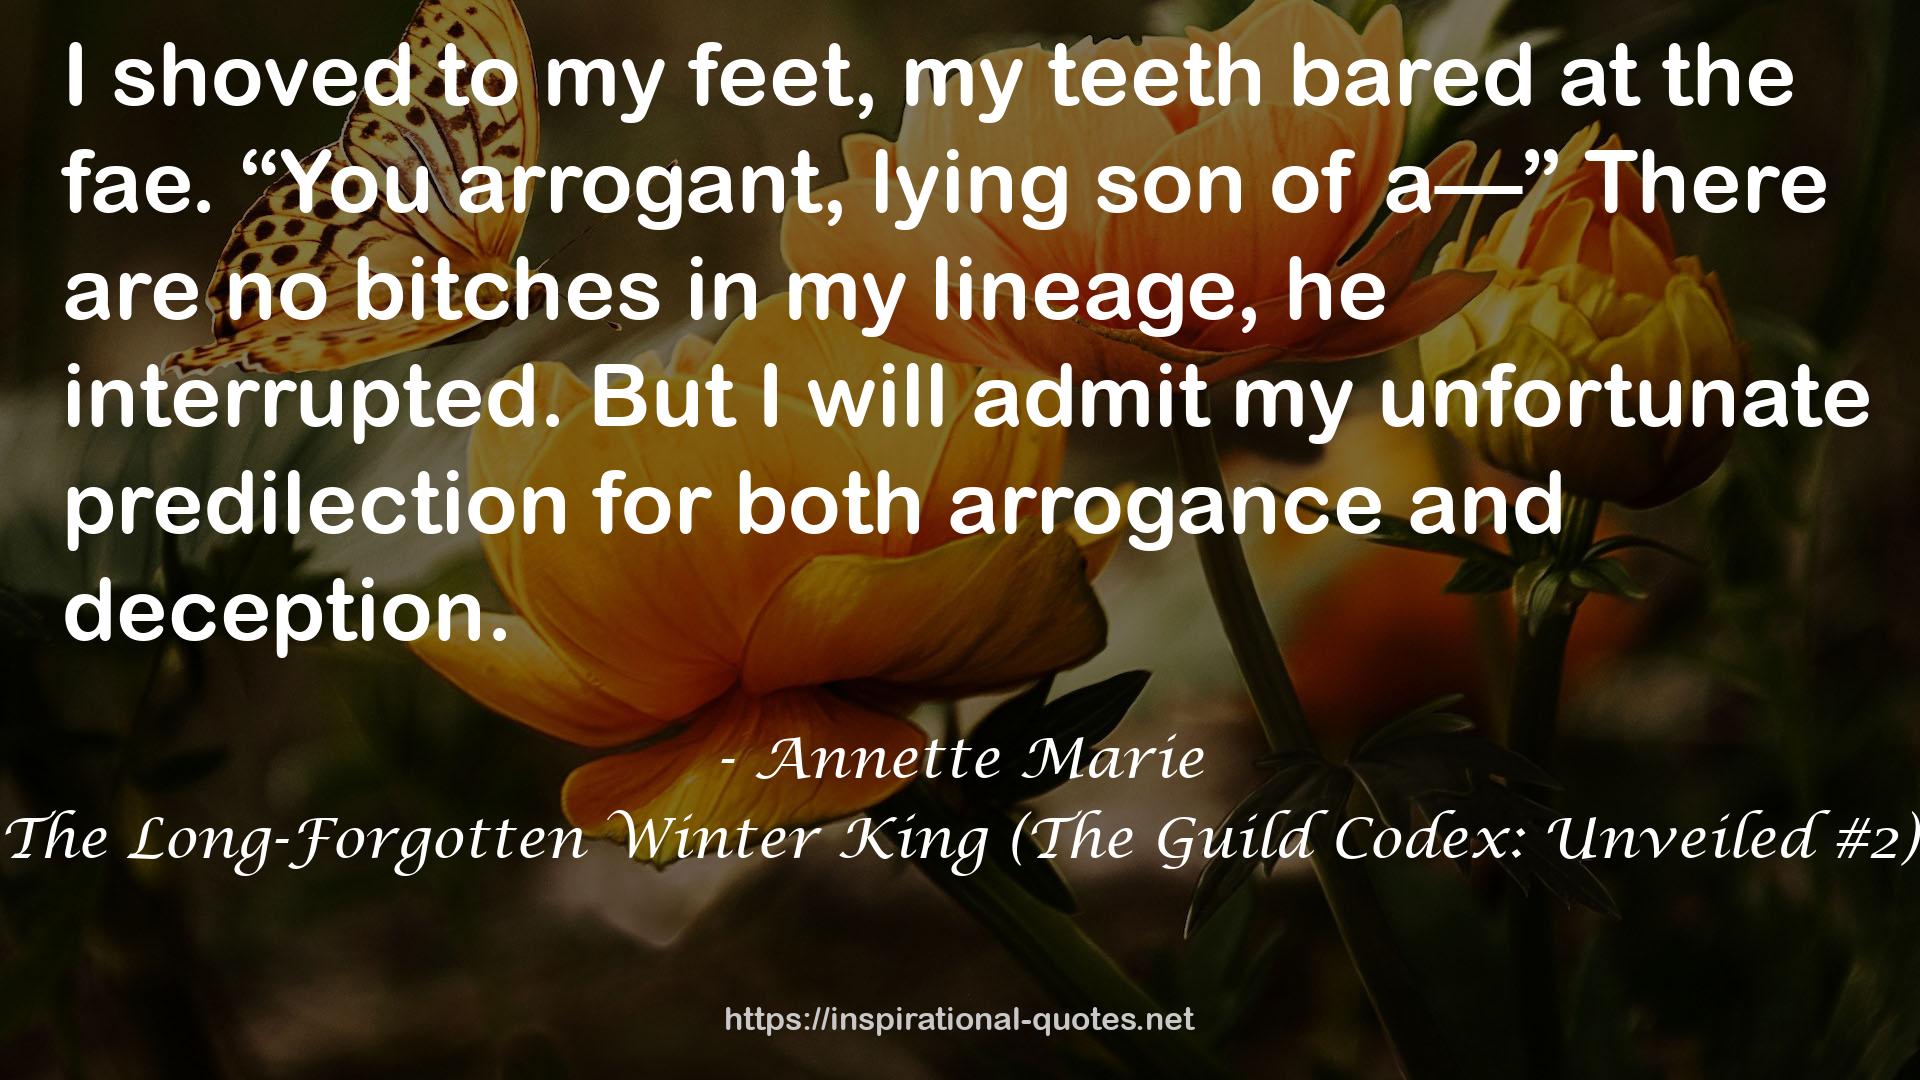 The Long-Forgotten Winter King (The Guild Codex: Unveiled #2) QUOTES